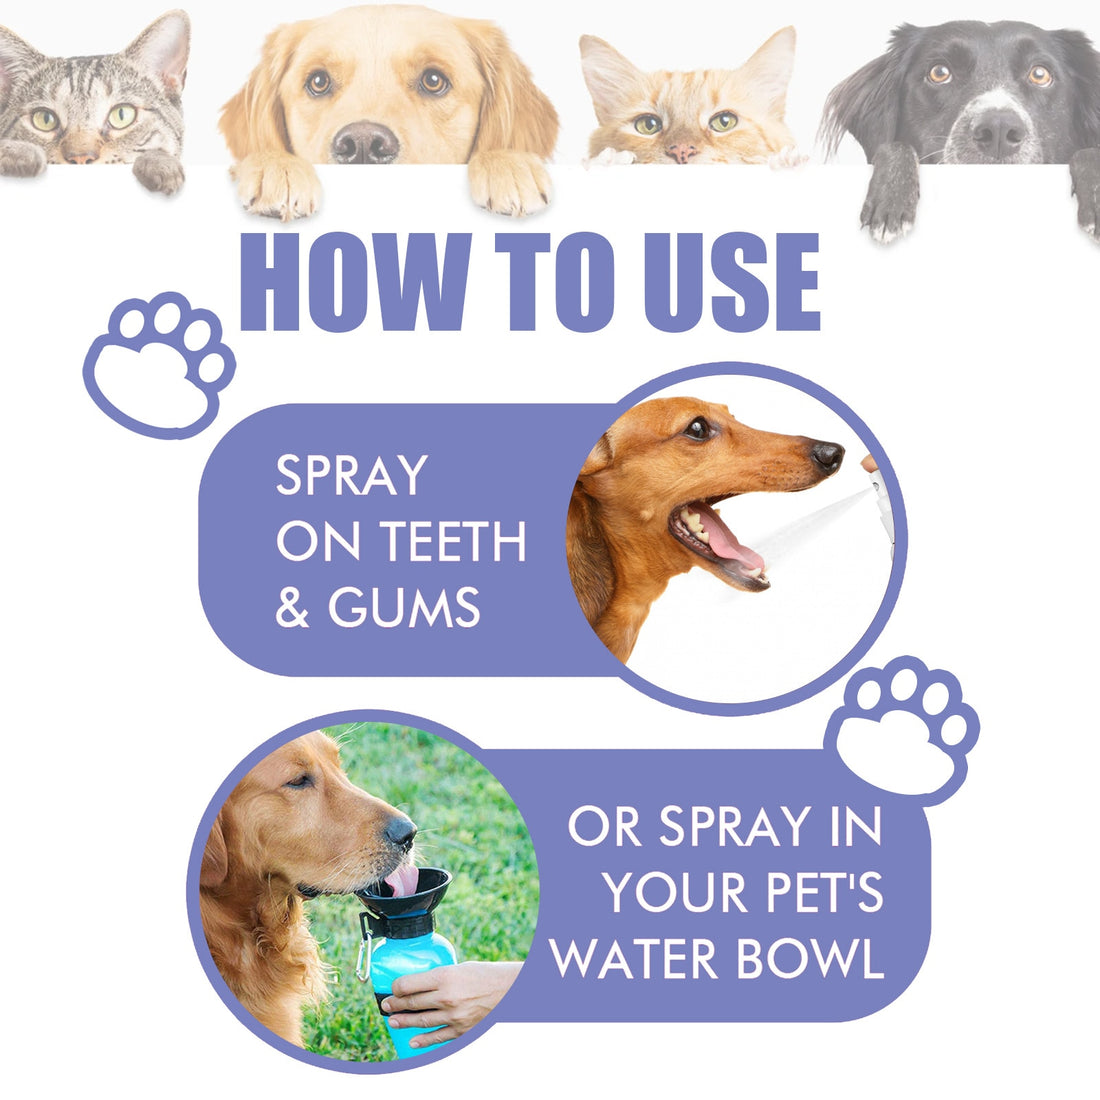 Pet  Teeth Cleaning Spray Oral Care Remove Tooth Stains Keep Fresh Breath for Cats and Dogs Whitening teeth Remove bad breath